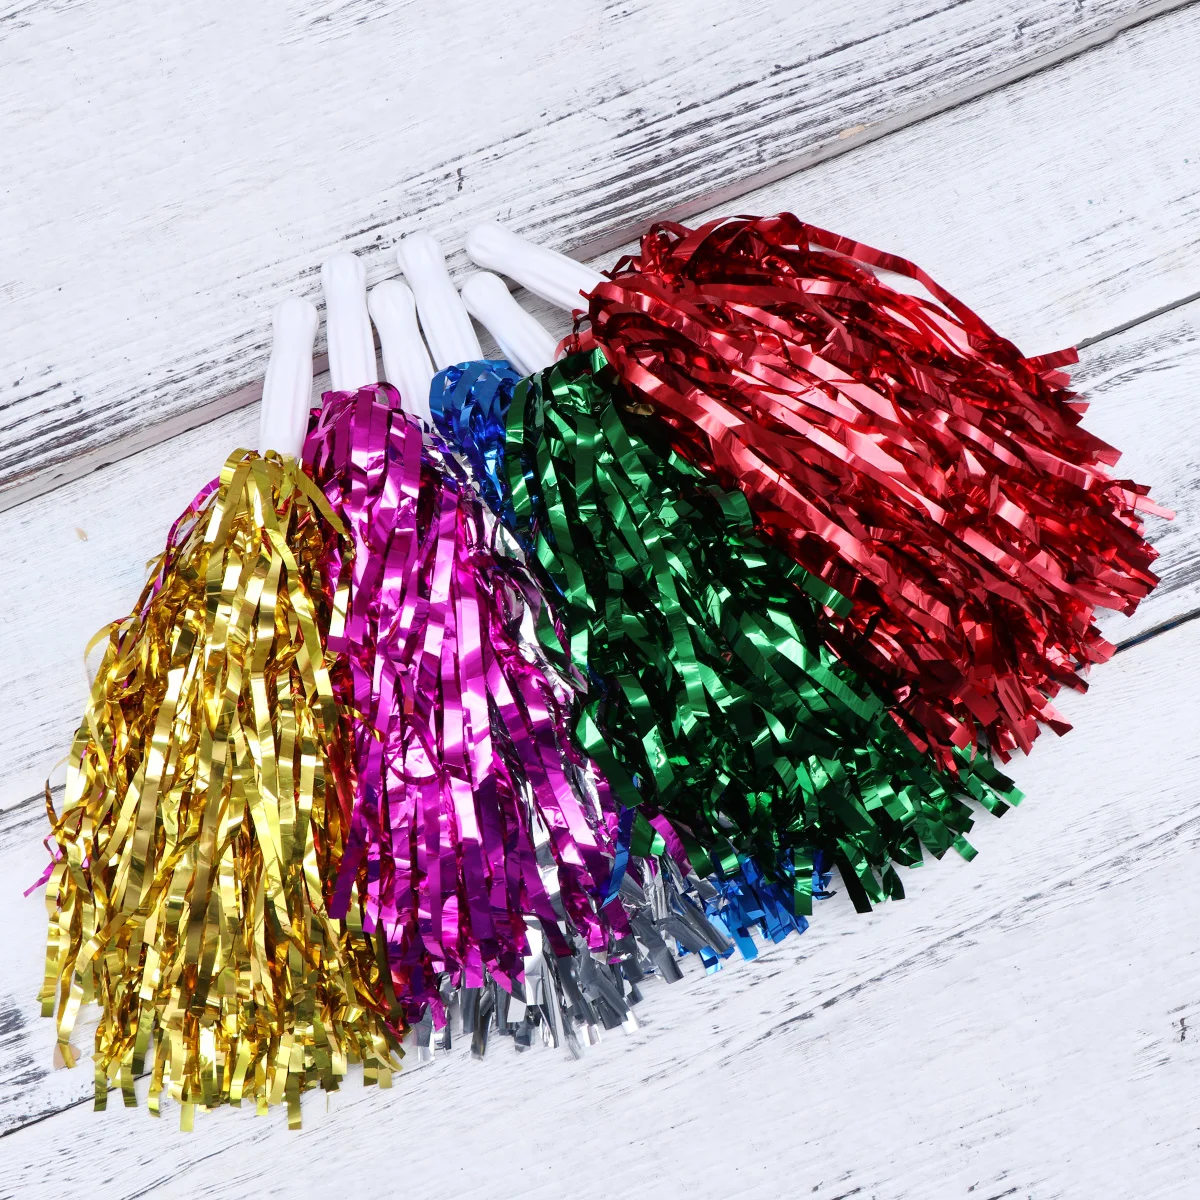 12pcs Straight Handle Cheering Poms Spirited Fun Cheerleading Kit Cheer Props for Performance Competition Cheering Sports Events 12pcs stray kids lightstick cheerleading pom pom metallic cheerleader pom poms sports dance cheer pom pom for performance